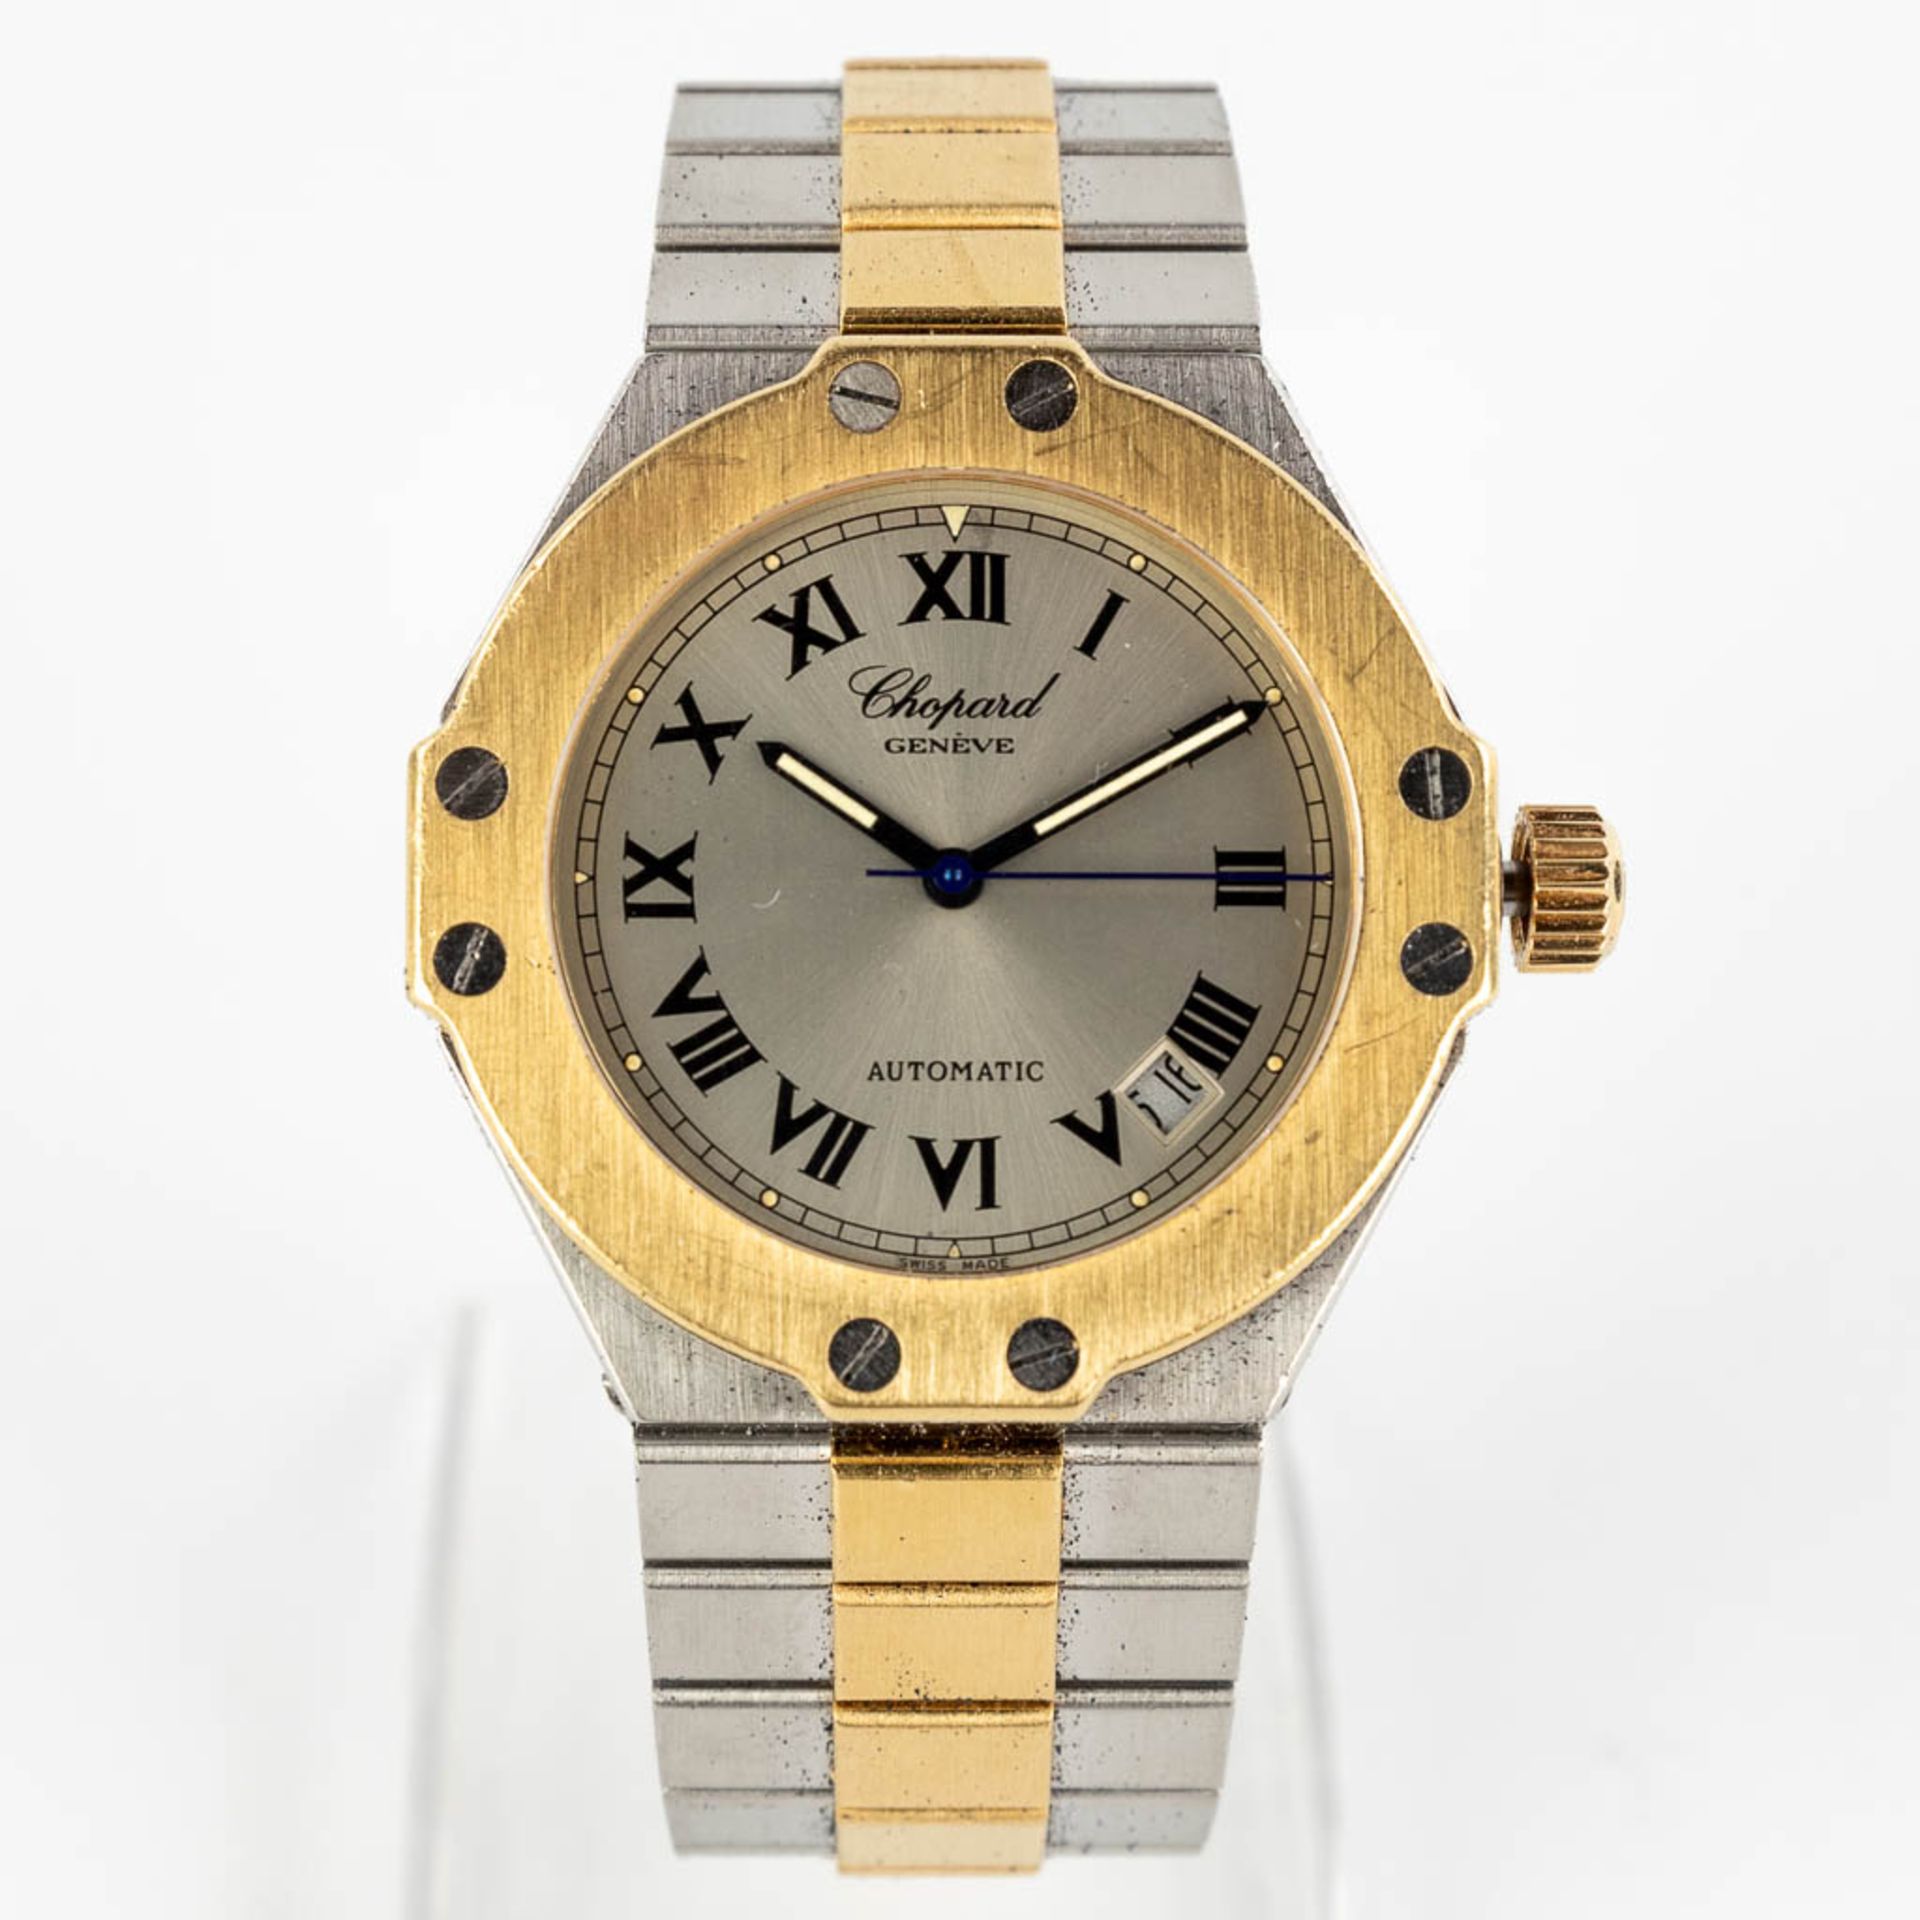 Chopard Saint Moritz, a men's wristwatch, 18kt yellow gold and steel. Box and papers. Reference 8300